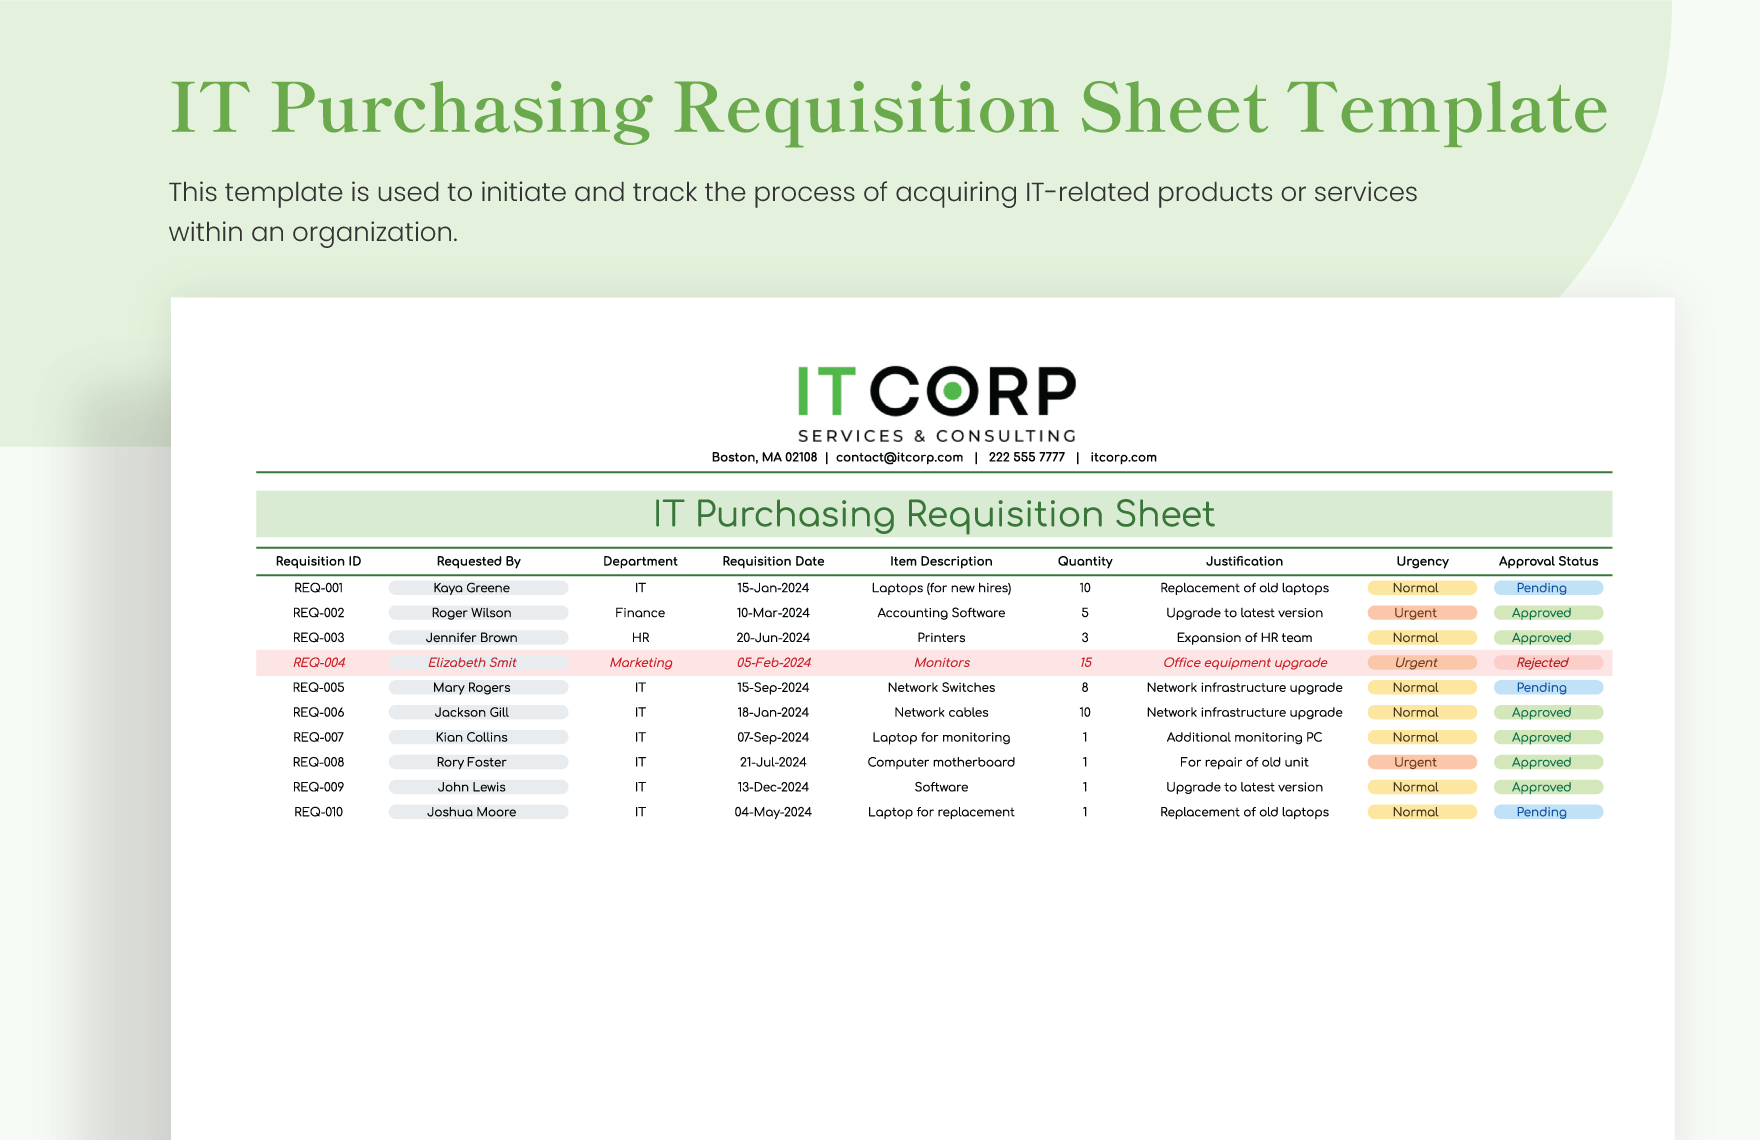 IT Purchasing Requisition Sheet Template